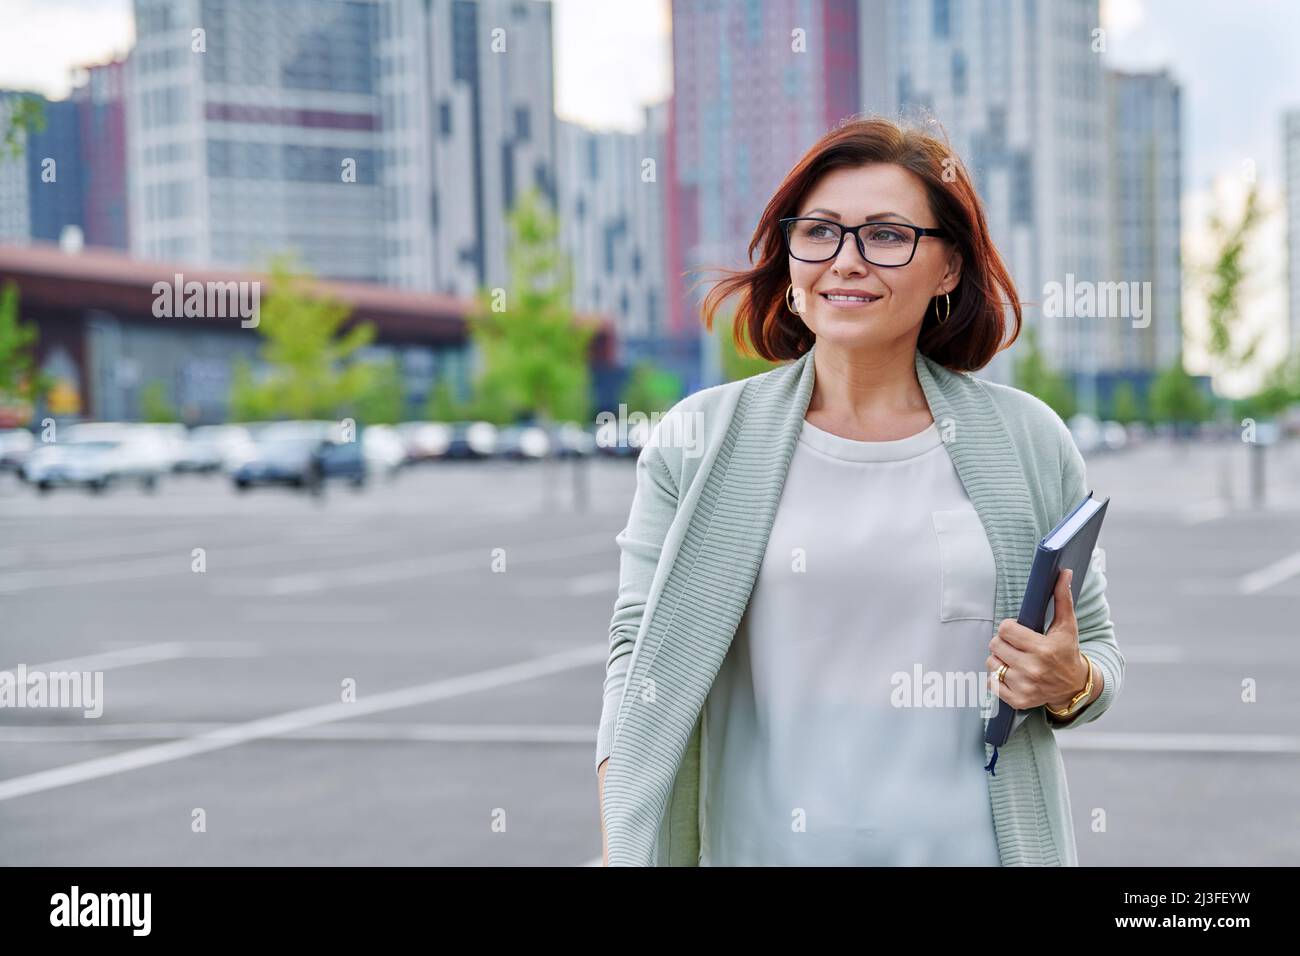 Smiling successful mature business woman walking outdoor, modern urban style background. Stock Photo